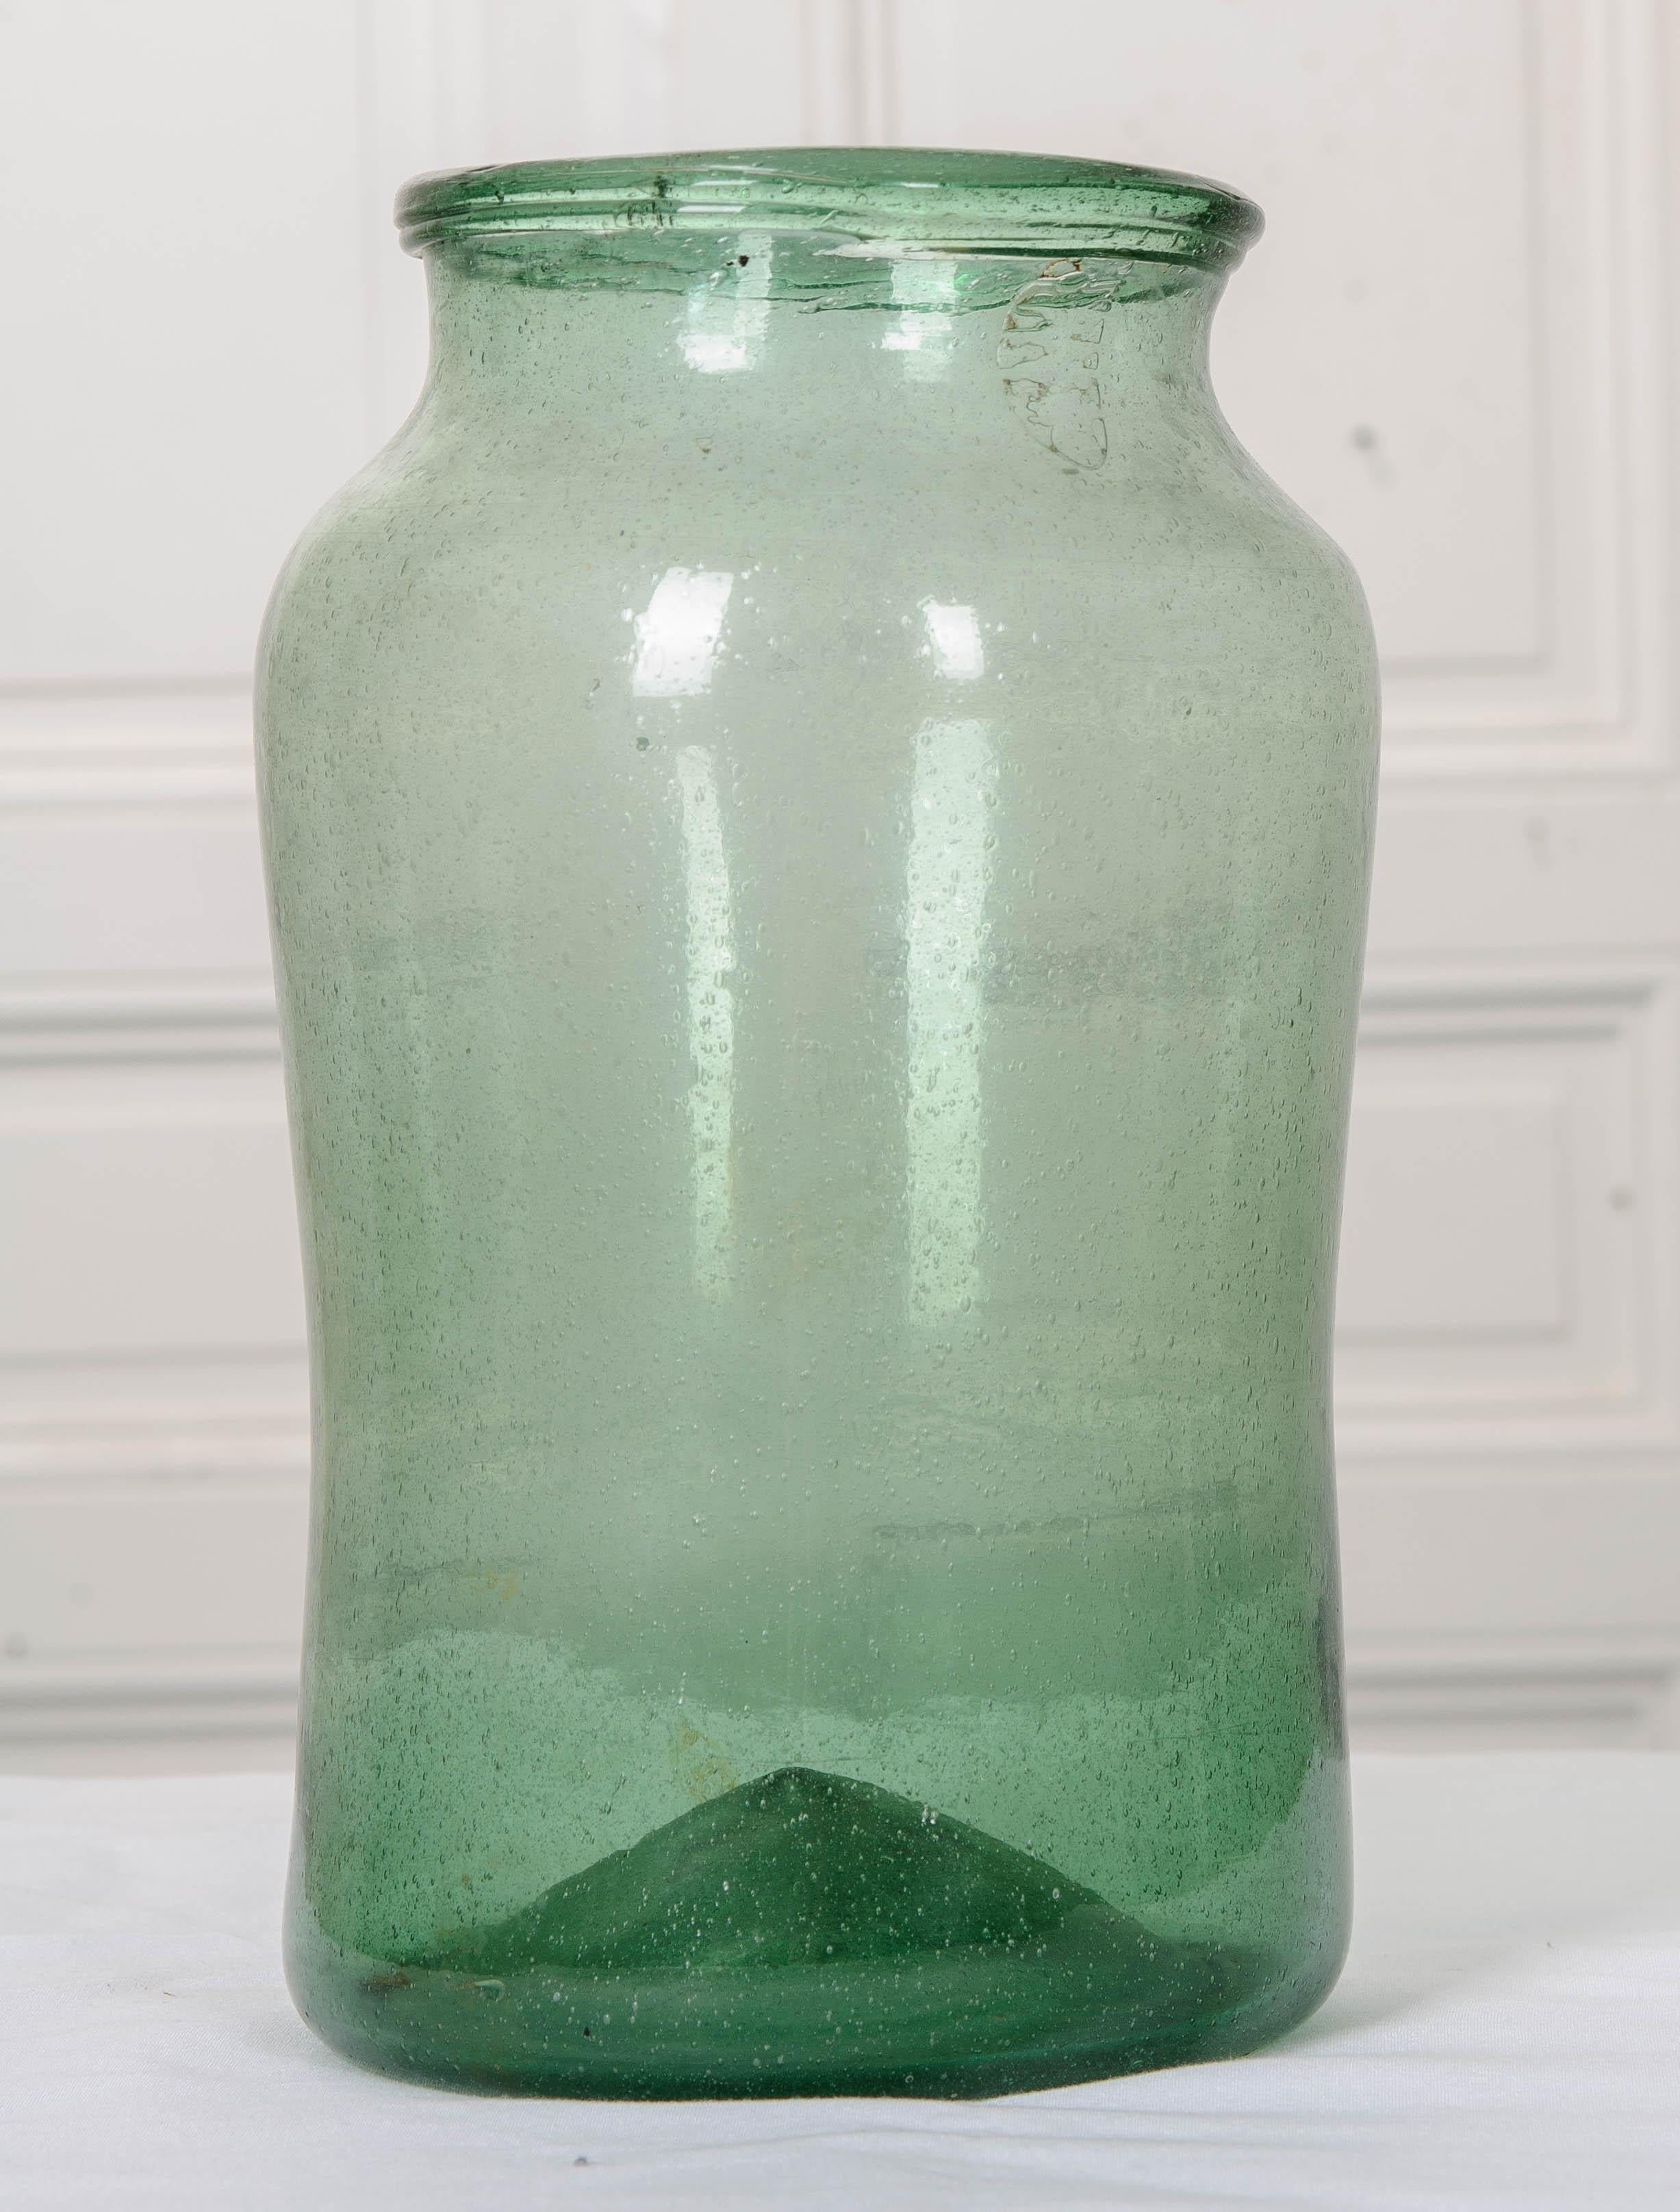 A wonderfully wonky blown-glass jar from 19th century, France. The jar’s less-than-perfect symmetry is a testament to the early methods of glassmaking. The glass has a wonderful, cool- blue or green coloration and is teeming with tiny bubbles that